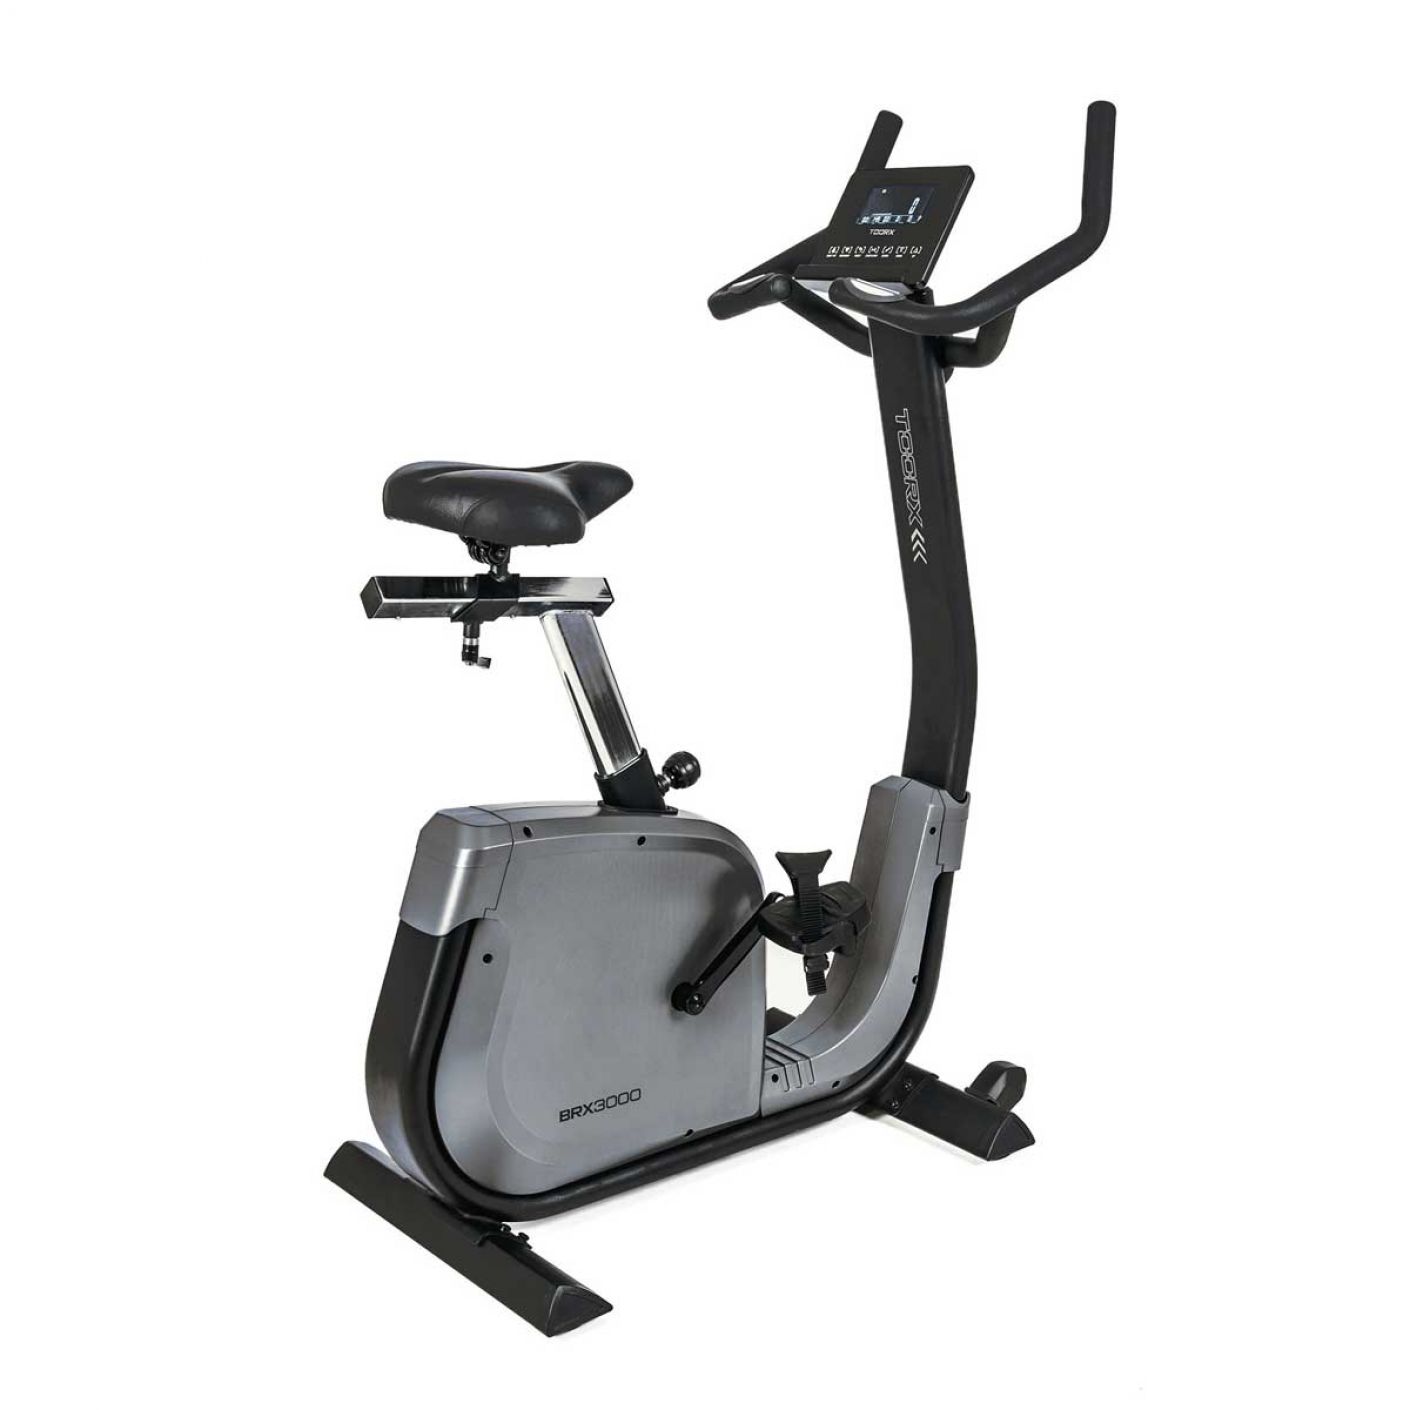 Toorx Exercise Bike BRX-3000 HRC Easy Access Ergometer with APP Ready Wireless Receiver